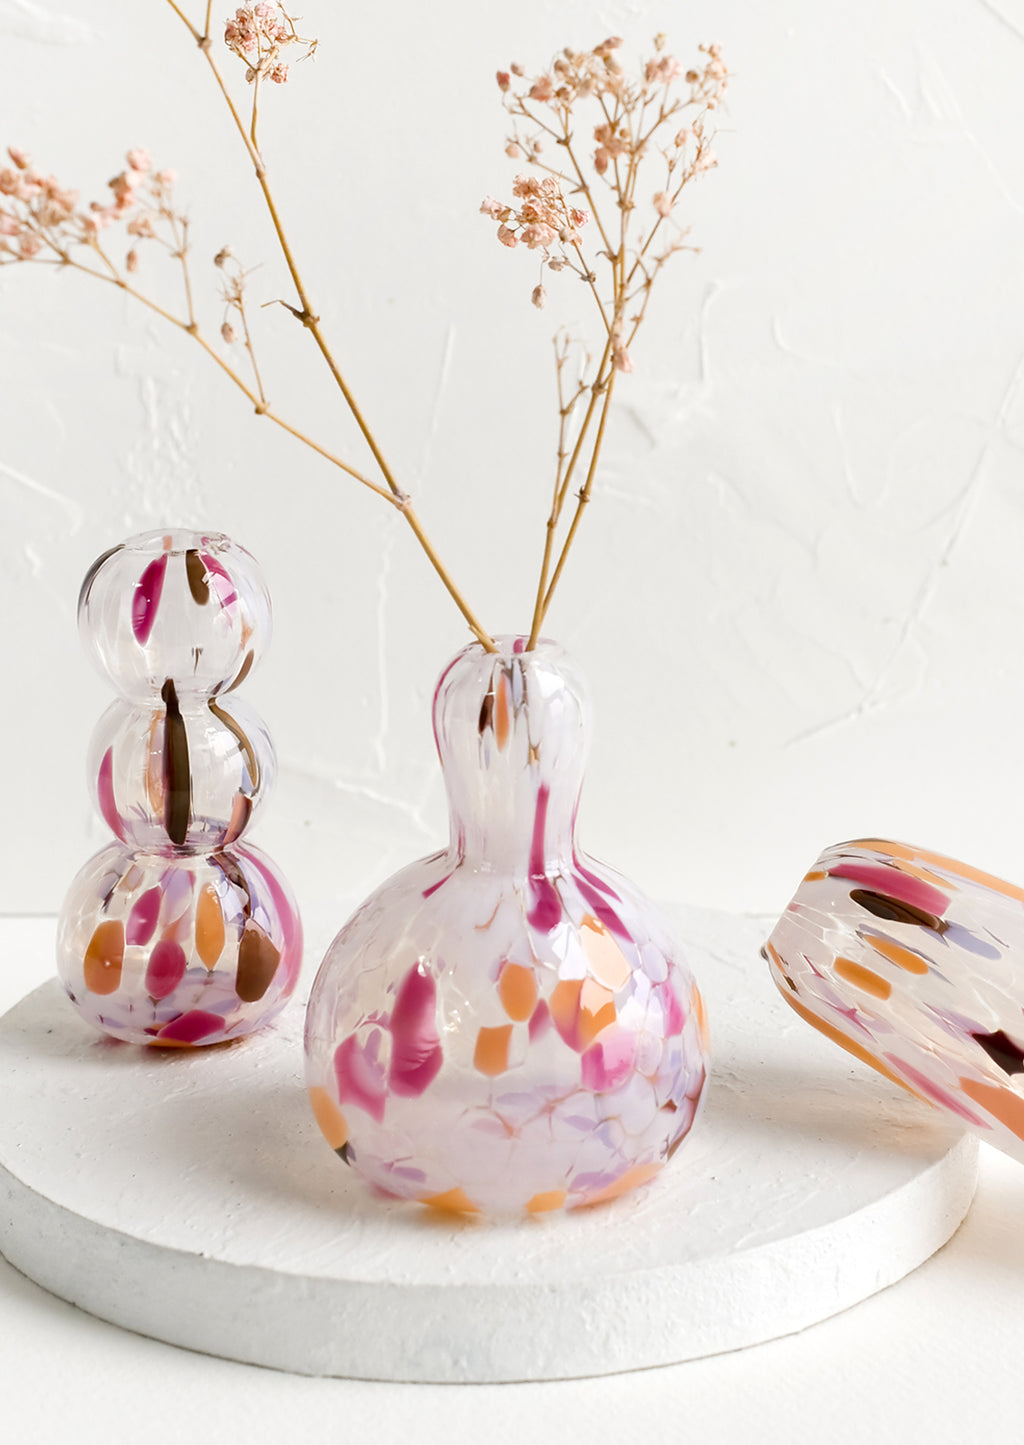 1: An assortment of glass vases in a range of shapes.